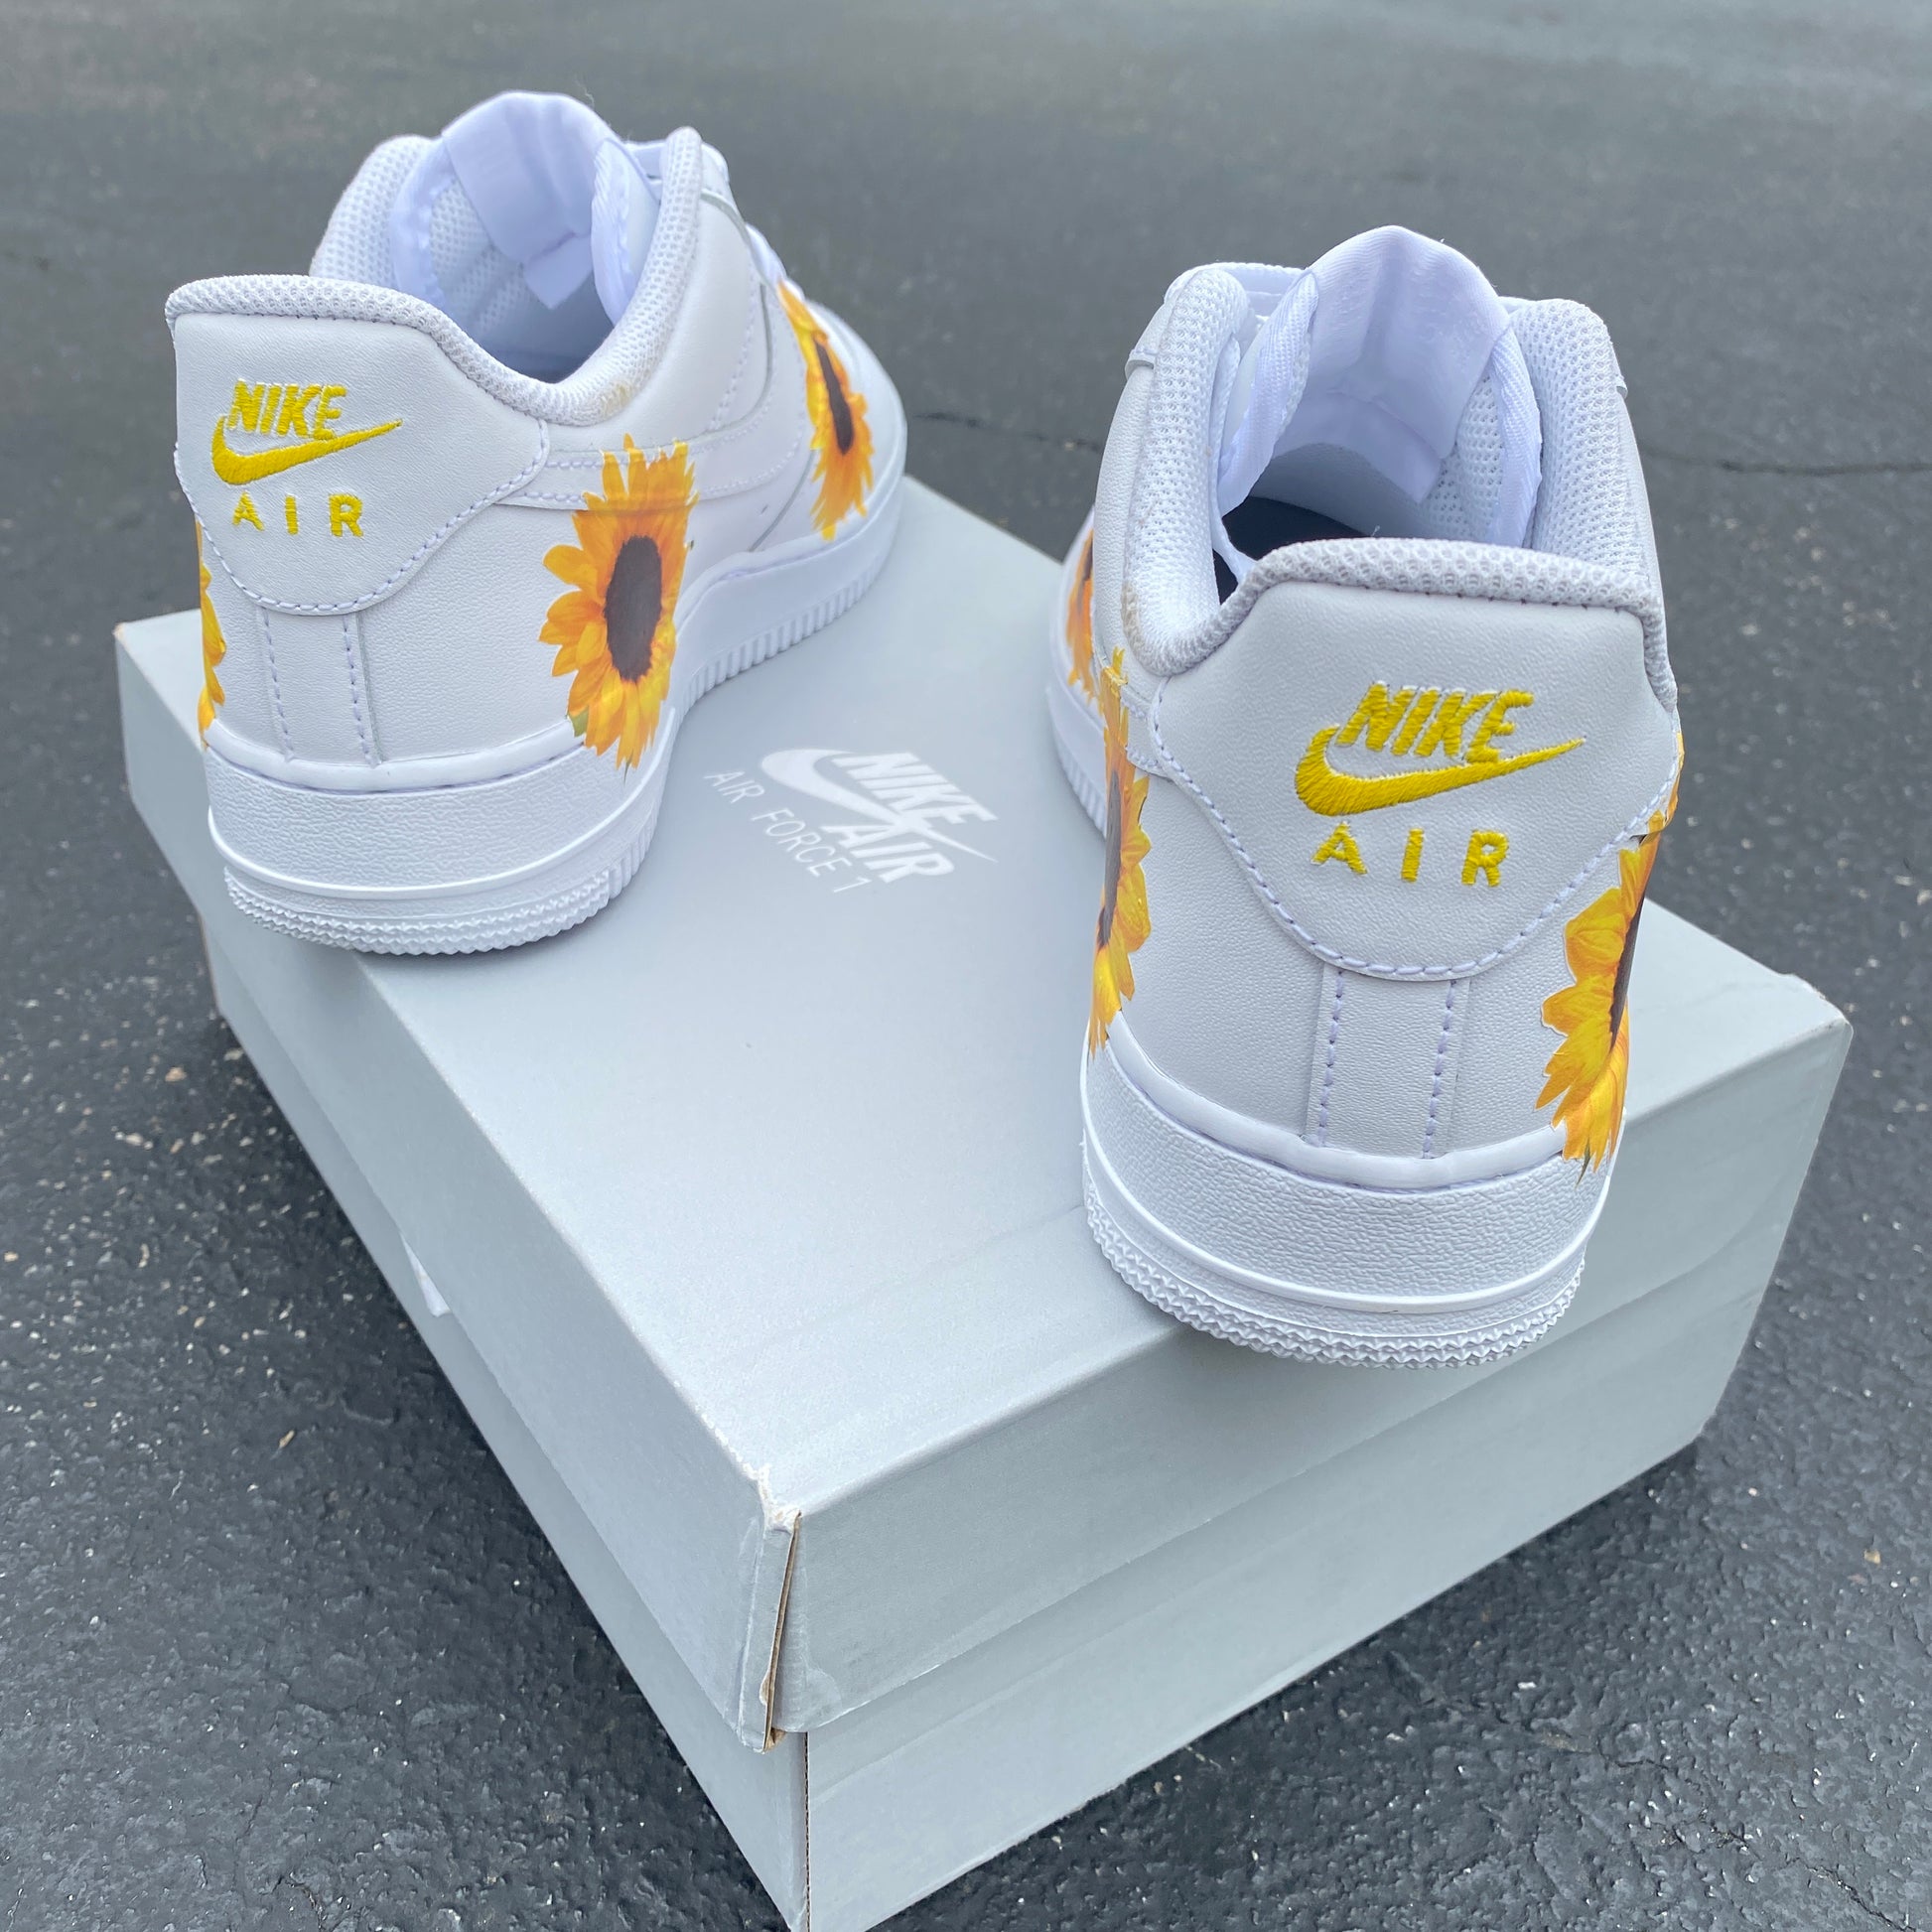 Nike Air Force 1 Custom PAINTED. Tell Me Your Nike Size Details and Your Ideas for The Design. This Listing Comes with Shoes.